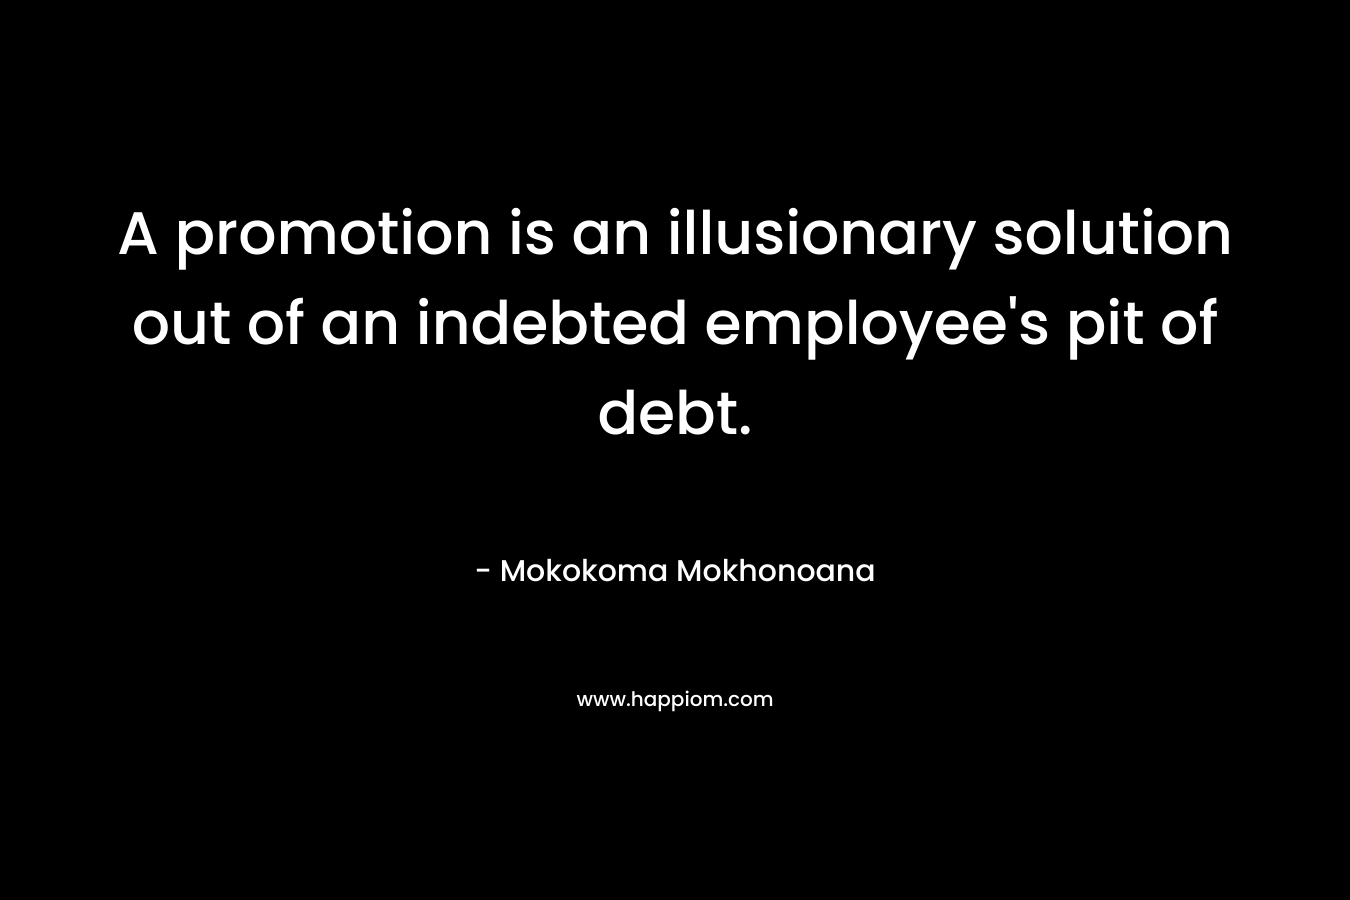 A promotion is an illusionary solution out of an indebted employee’s pit of debt. – Mokokoma Mokhonoana